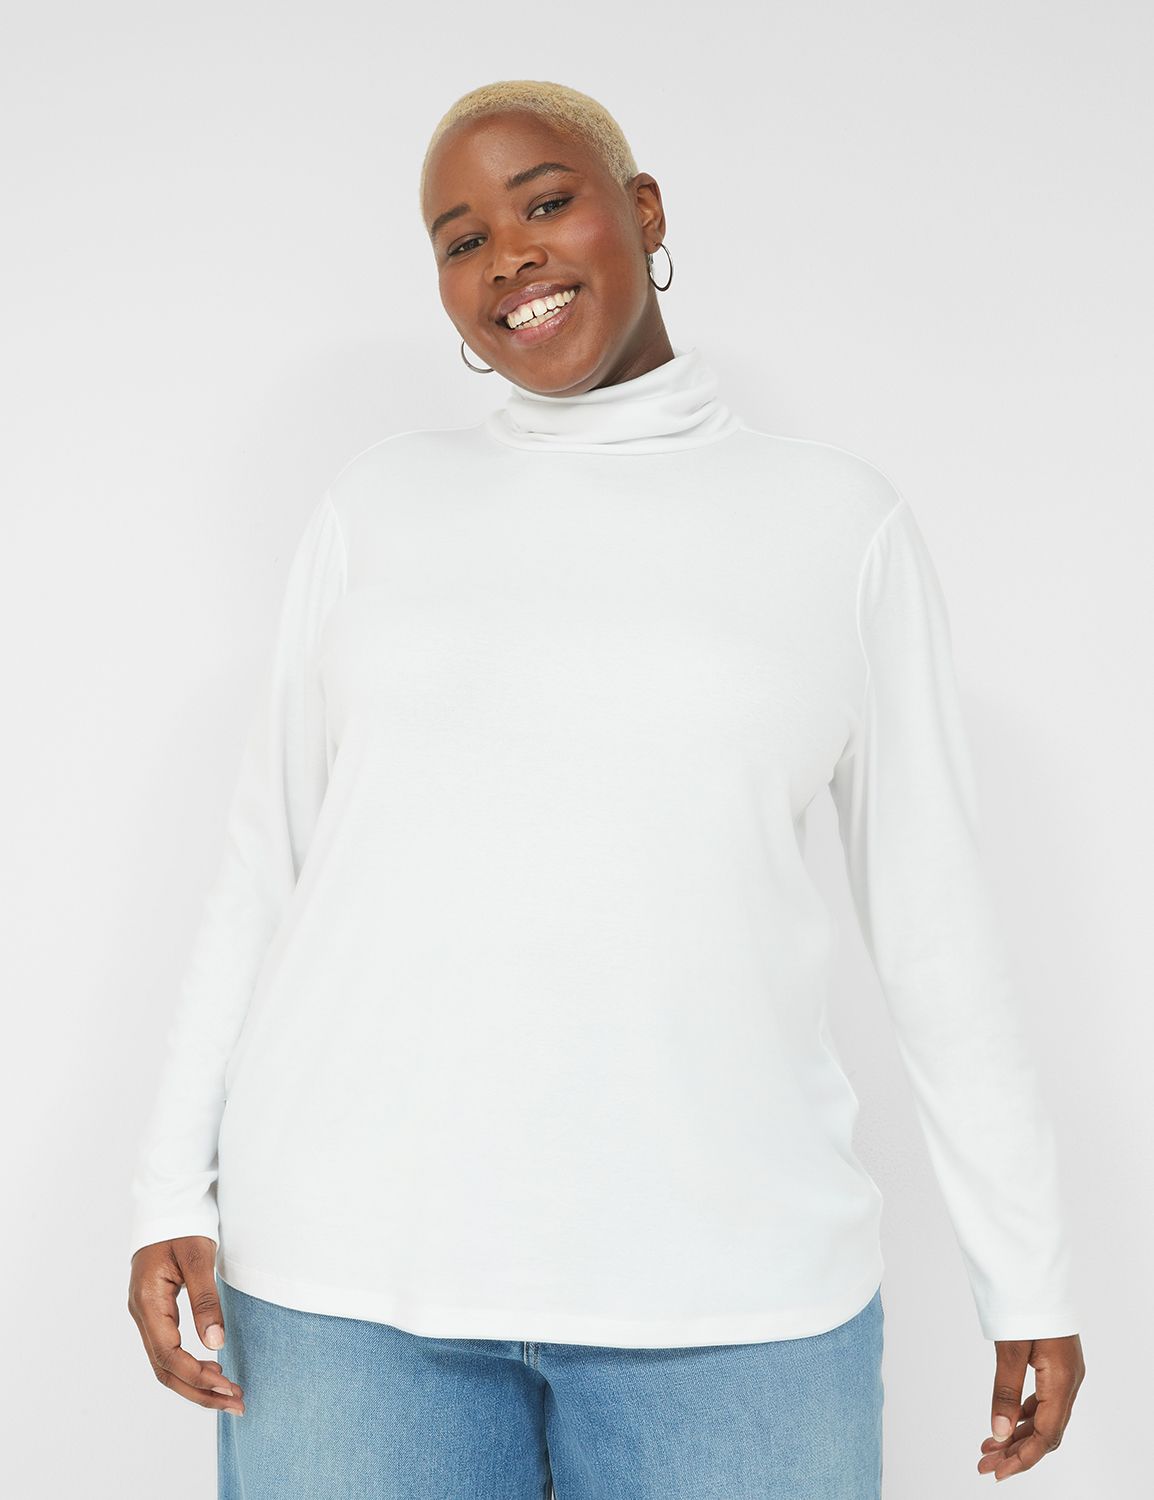 Fitted Long-Sleeve Turtleneck Top